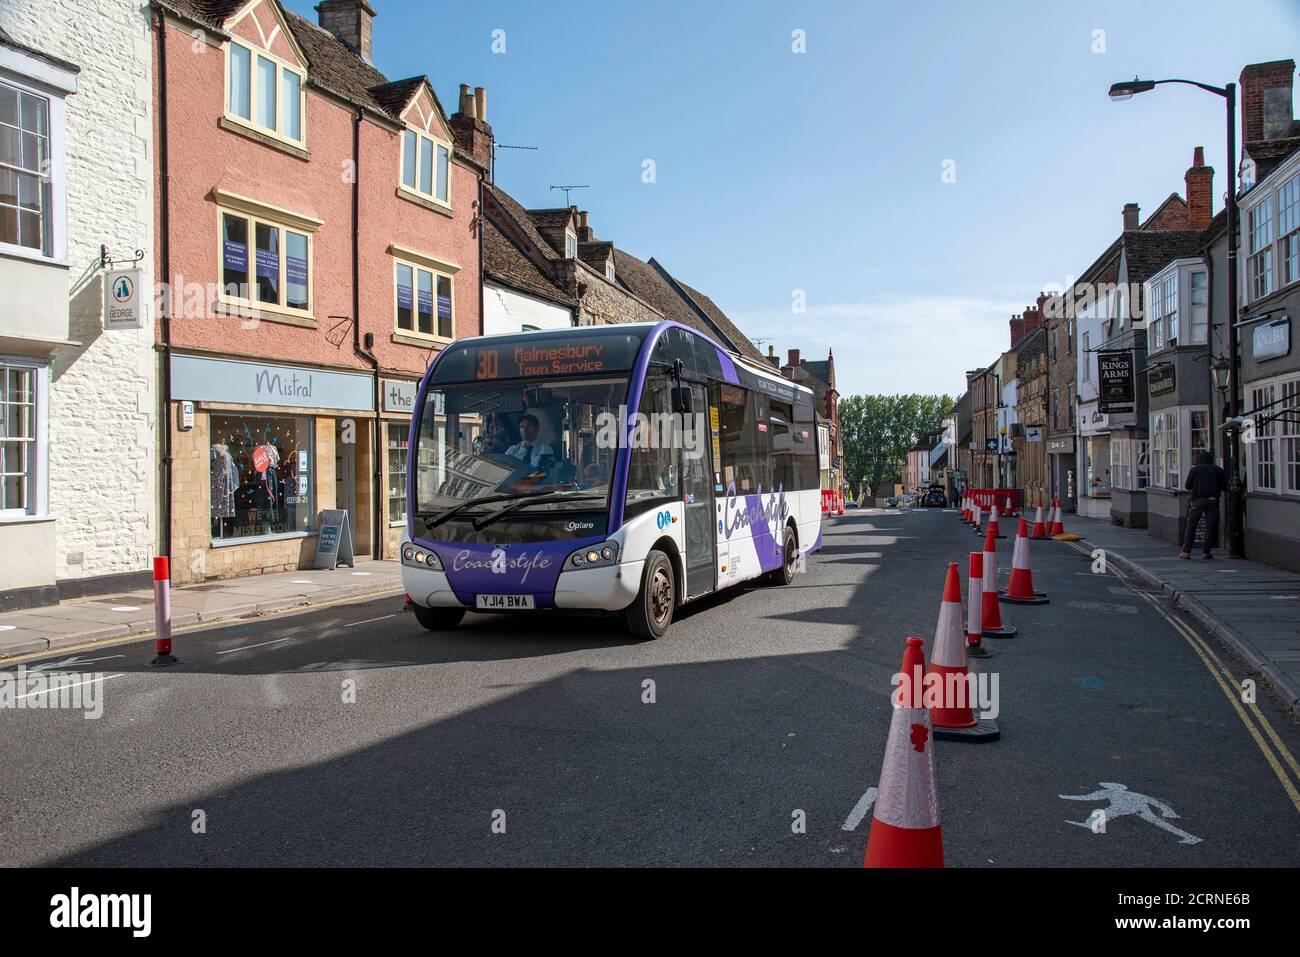 Malmesbury, Wiltshire, England, UK. 2020, Social distancing traffic cones and signage in the main street of this historic market town. Town service bu Stock Photo